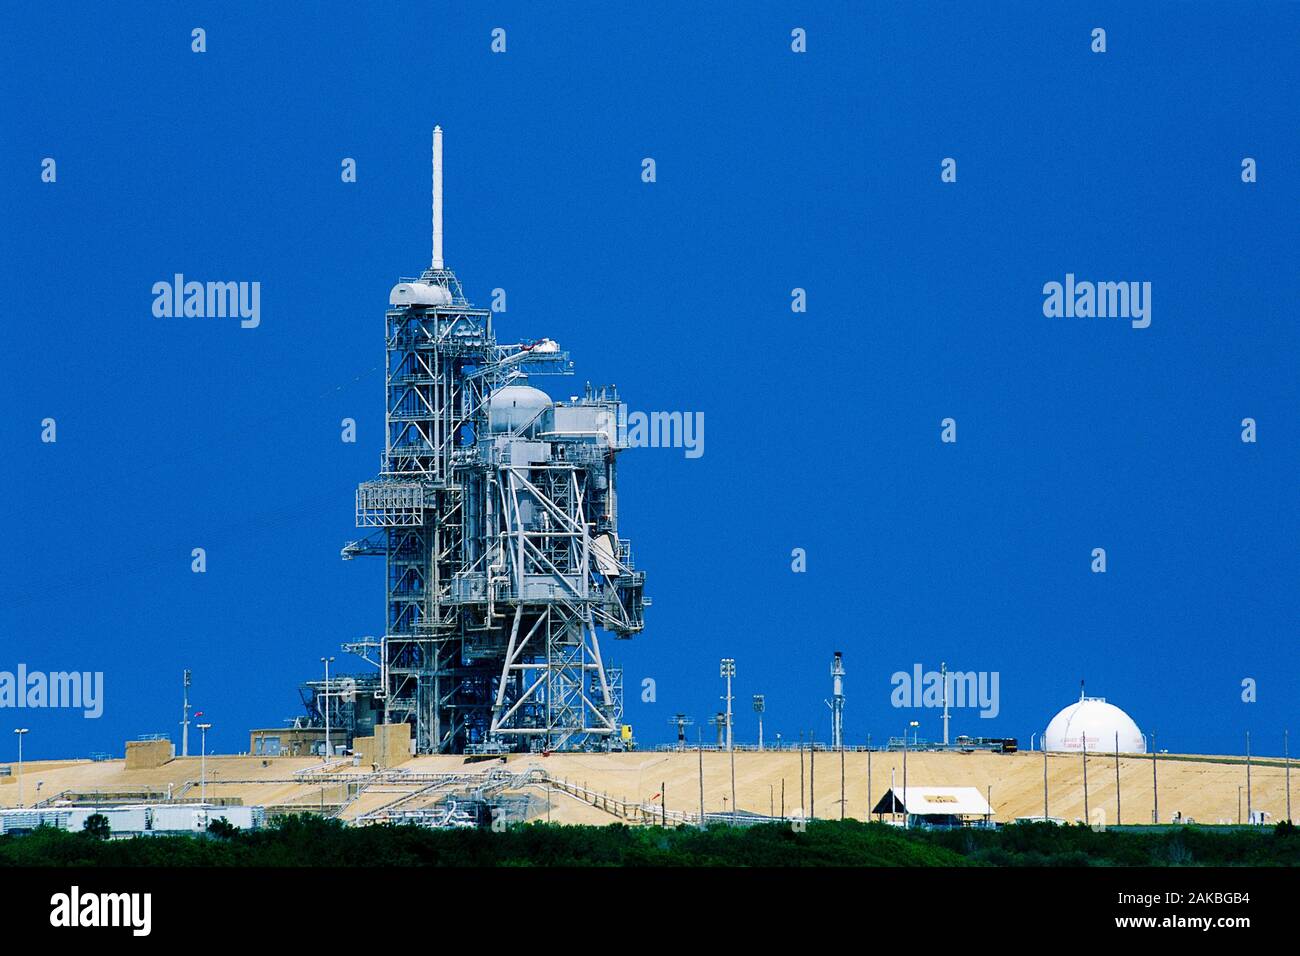 Shuttle Launch Pad, Kennedy Space Center, Cape Canaveral, Florida, USA Stockfoto